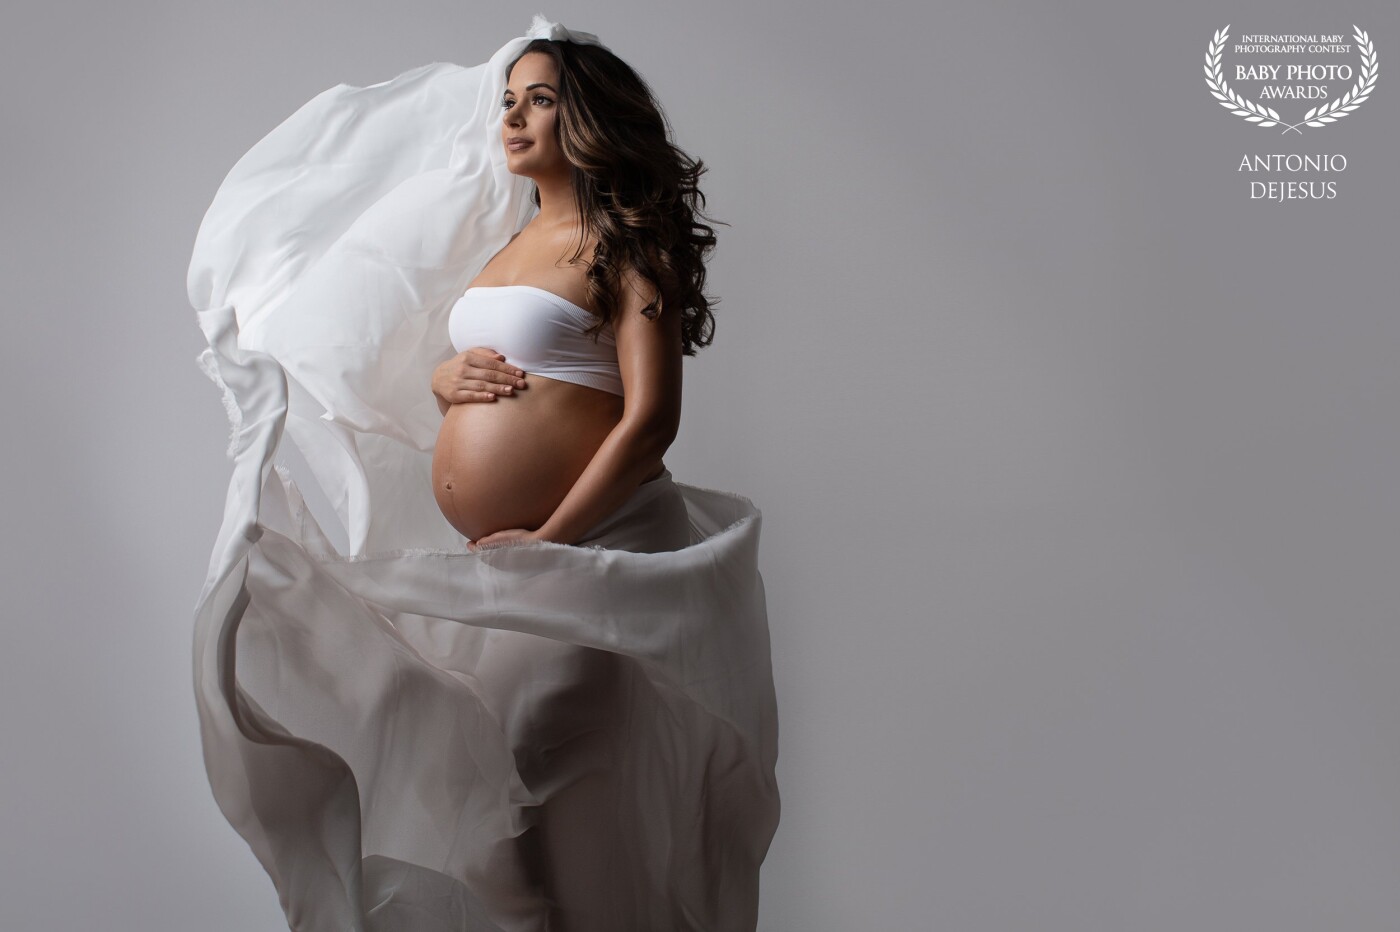 This beautiful mother is expecting her first baby boy! The white flowy silk drape signifies the peaceful and tender and nature of a mother’s love.